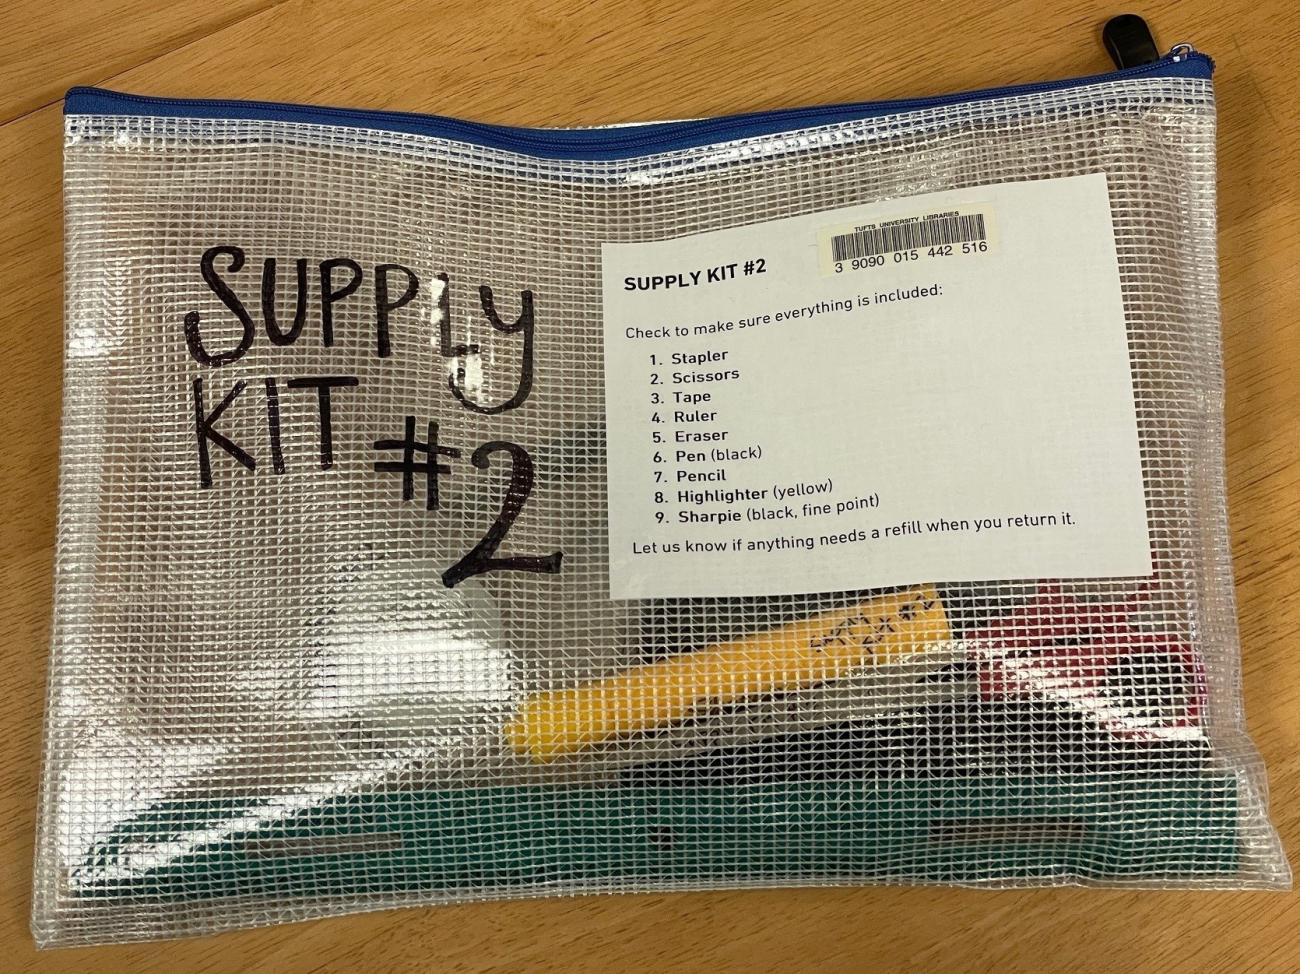 Image of supply kit in bag with content listing and barcode